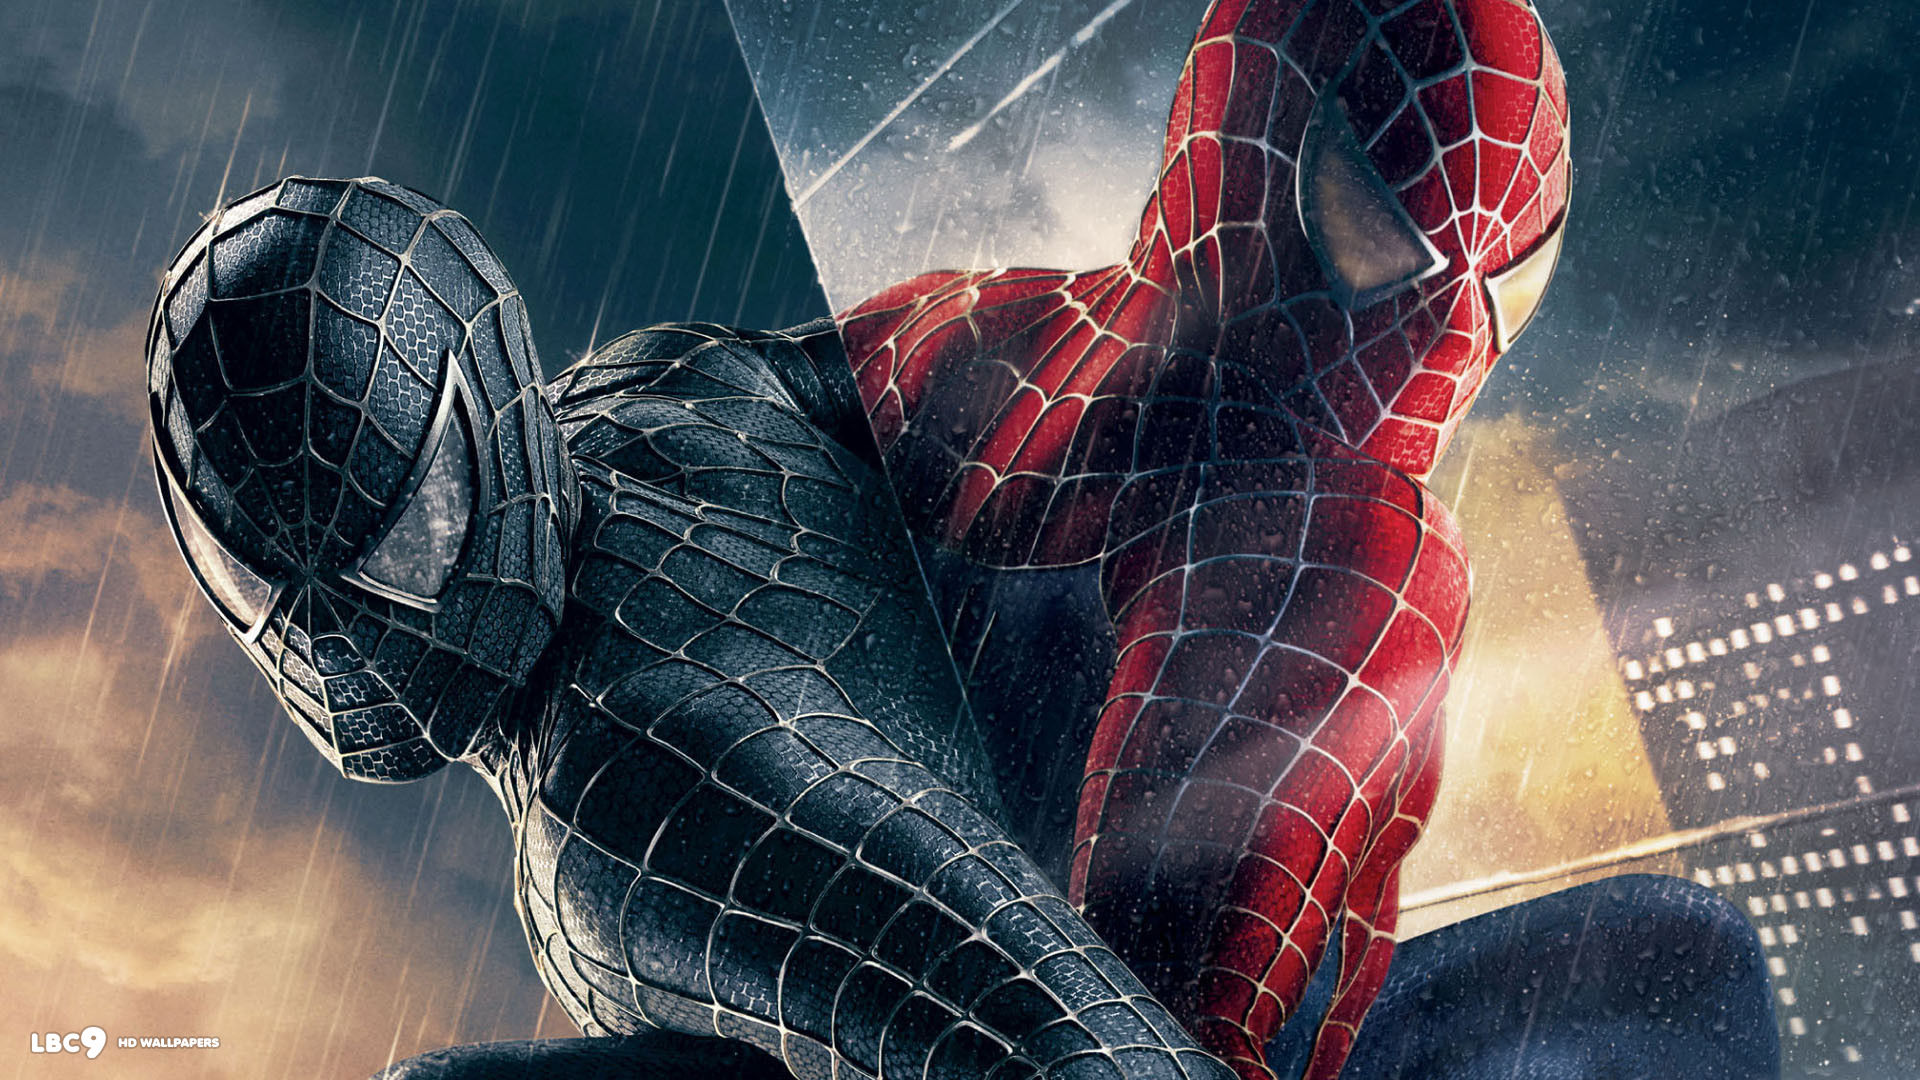 High Quality Spiderman 4 HD Wallpapers6 - HD Wallpapers N